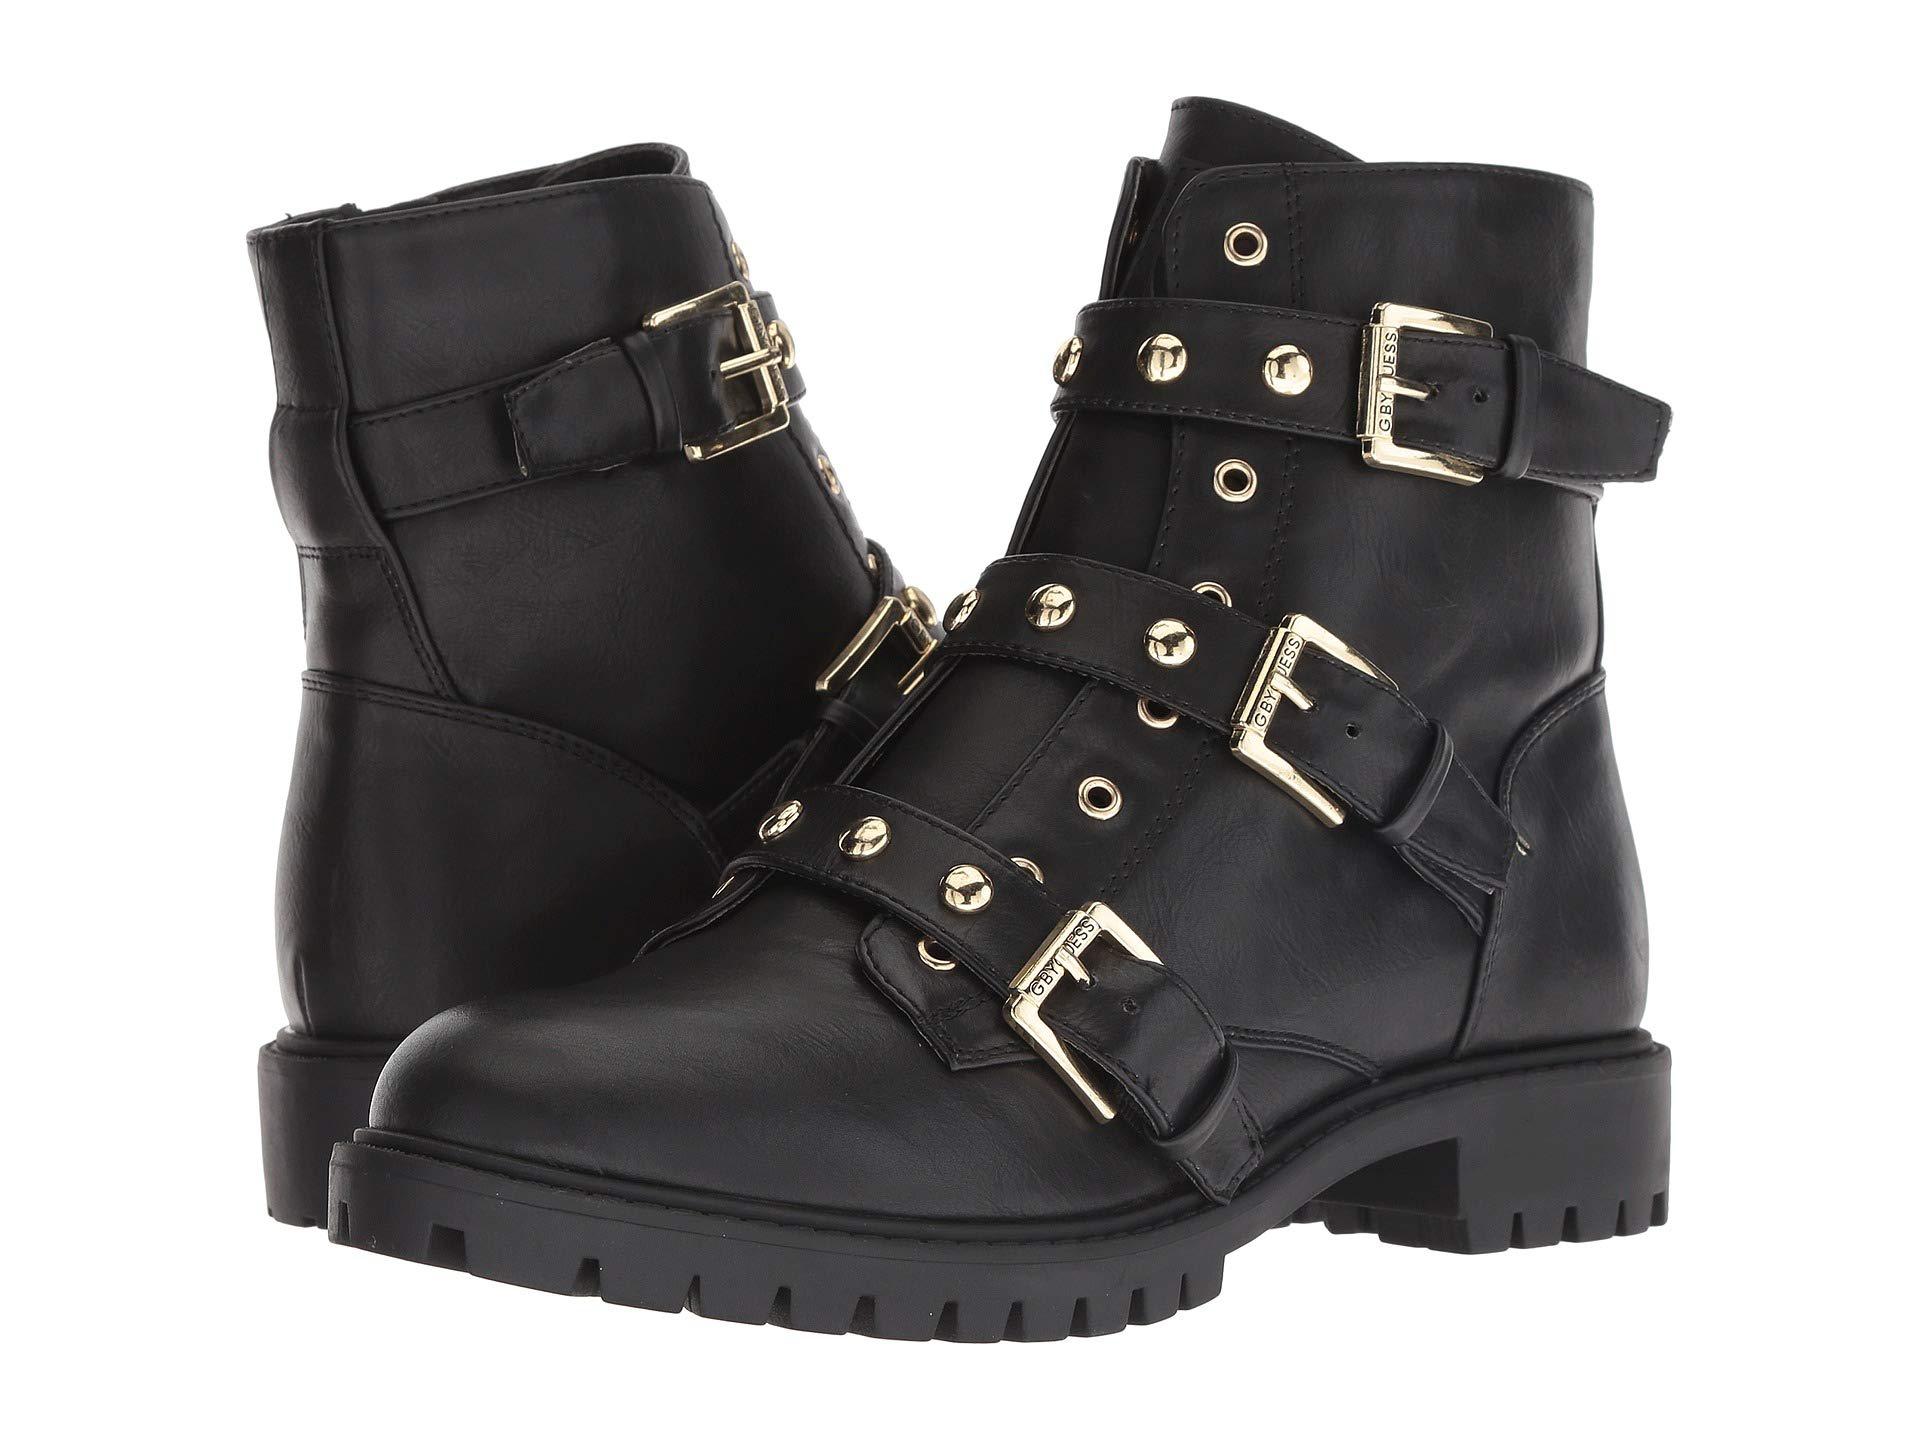 G by Guess Prez2 (black) Boots - Lyst